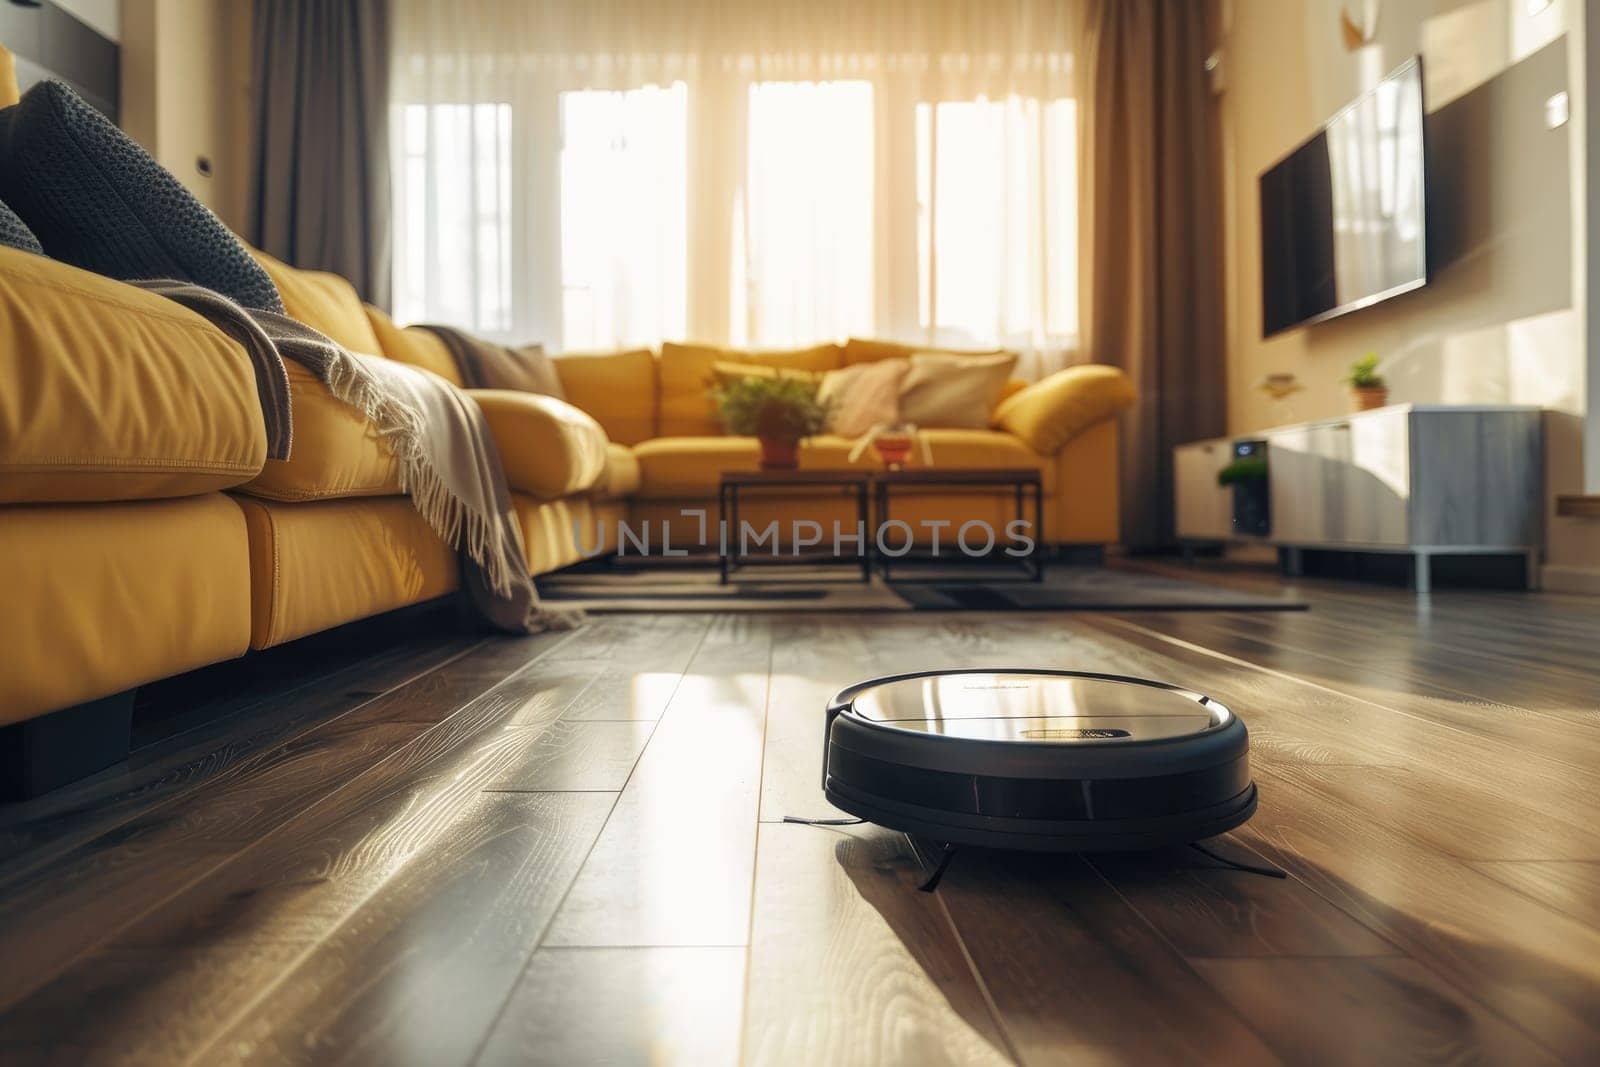 A robot vacuum cleaner navigates a clean living room floor. by Chawagen